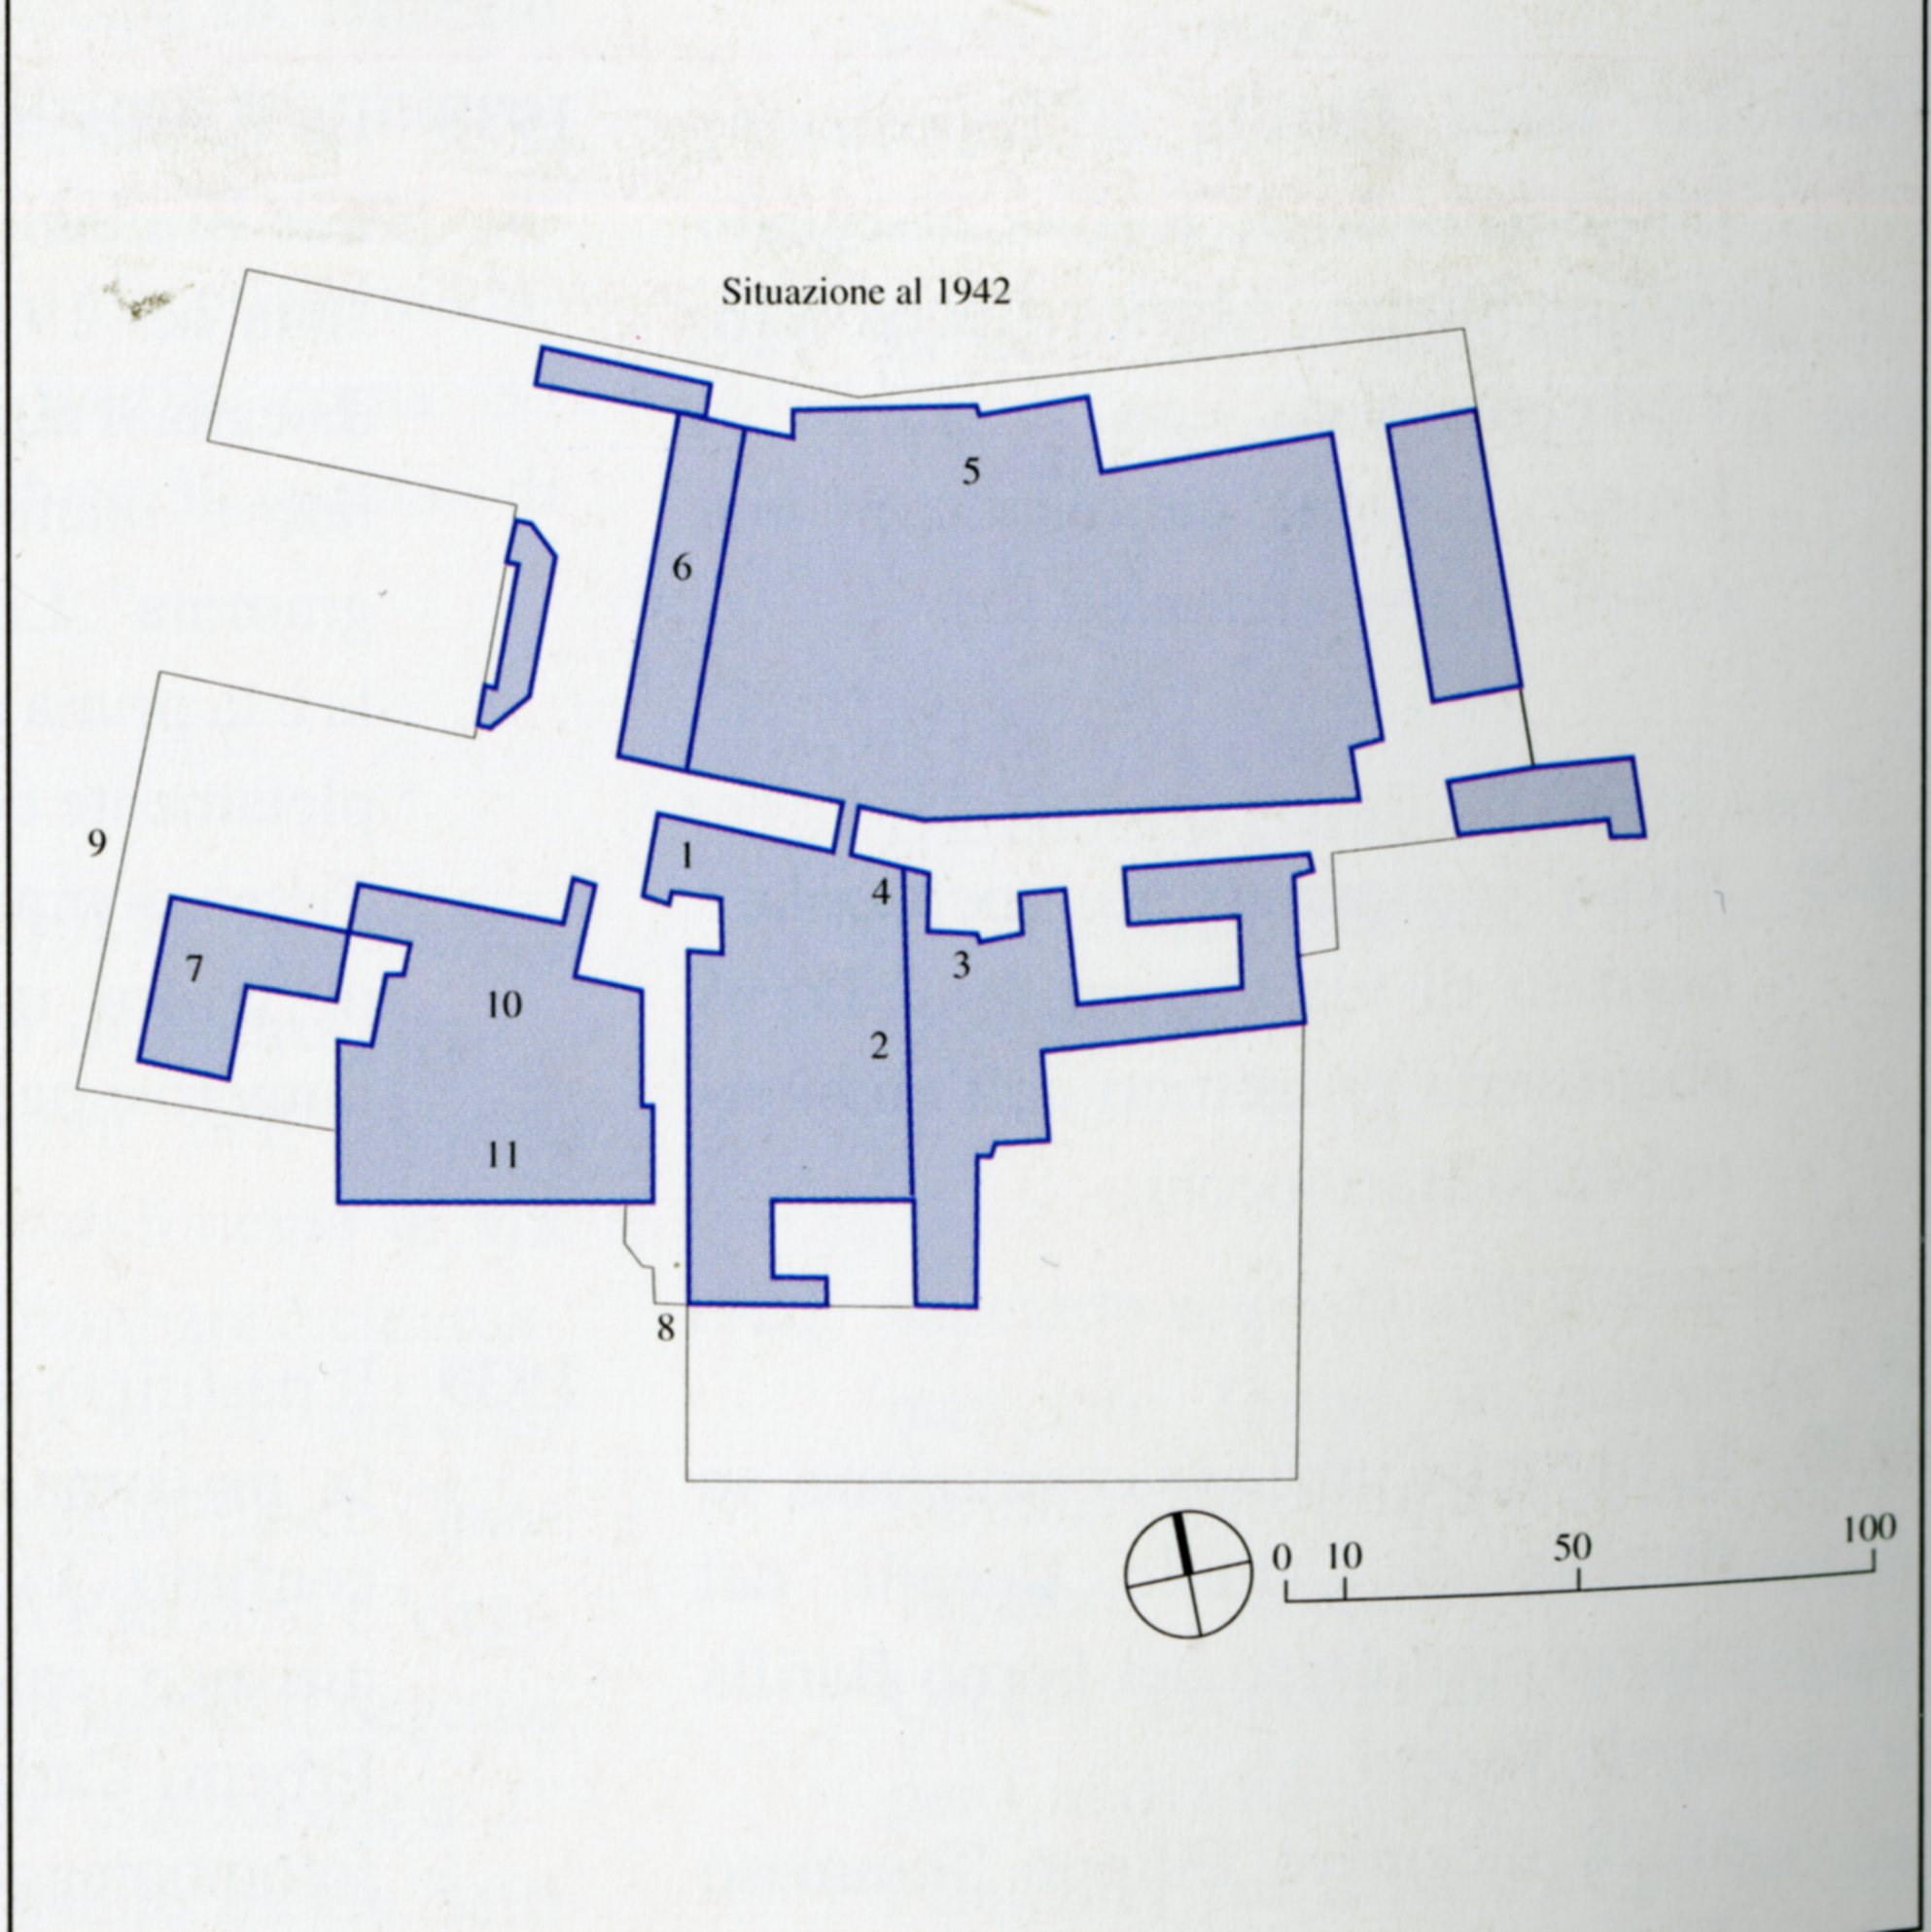 Floor plan of the building expansion of Barilla complex in 1942: 1) Offices and residence building, 1908; 2) Pasta factory, 1911; 3) Church of Saint Anthony, erected in 1903;04) Extension of the Pasta Factory, architect - Camillo Uccelli, 1922; 5) New ove